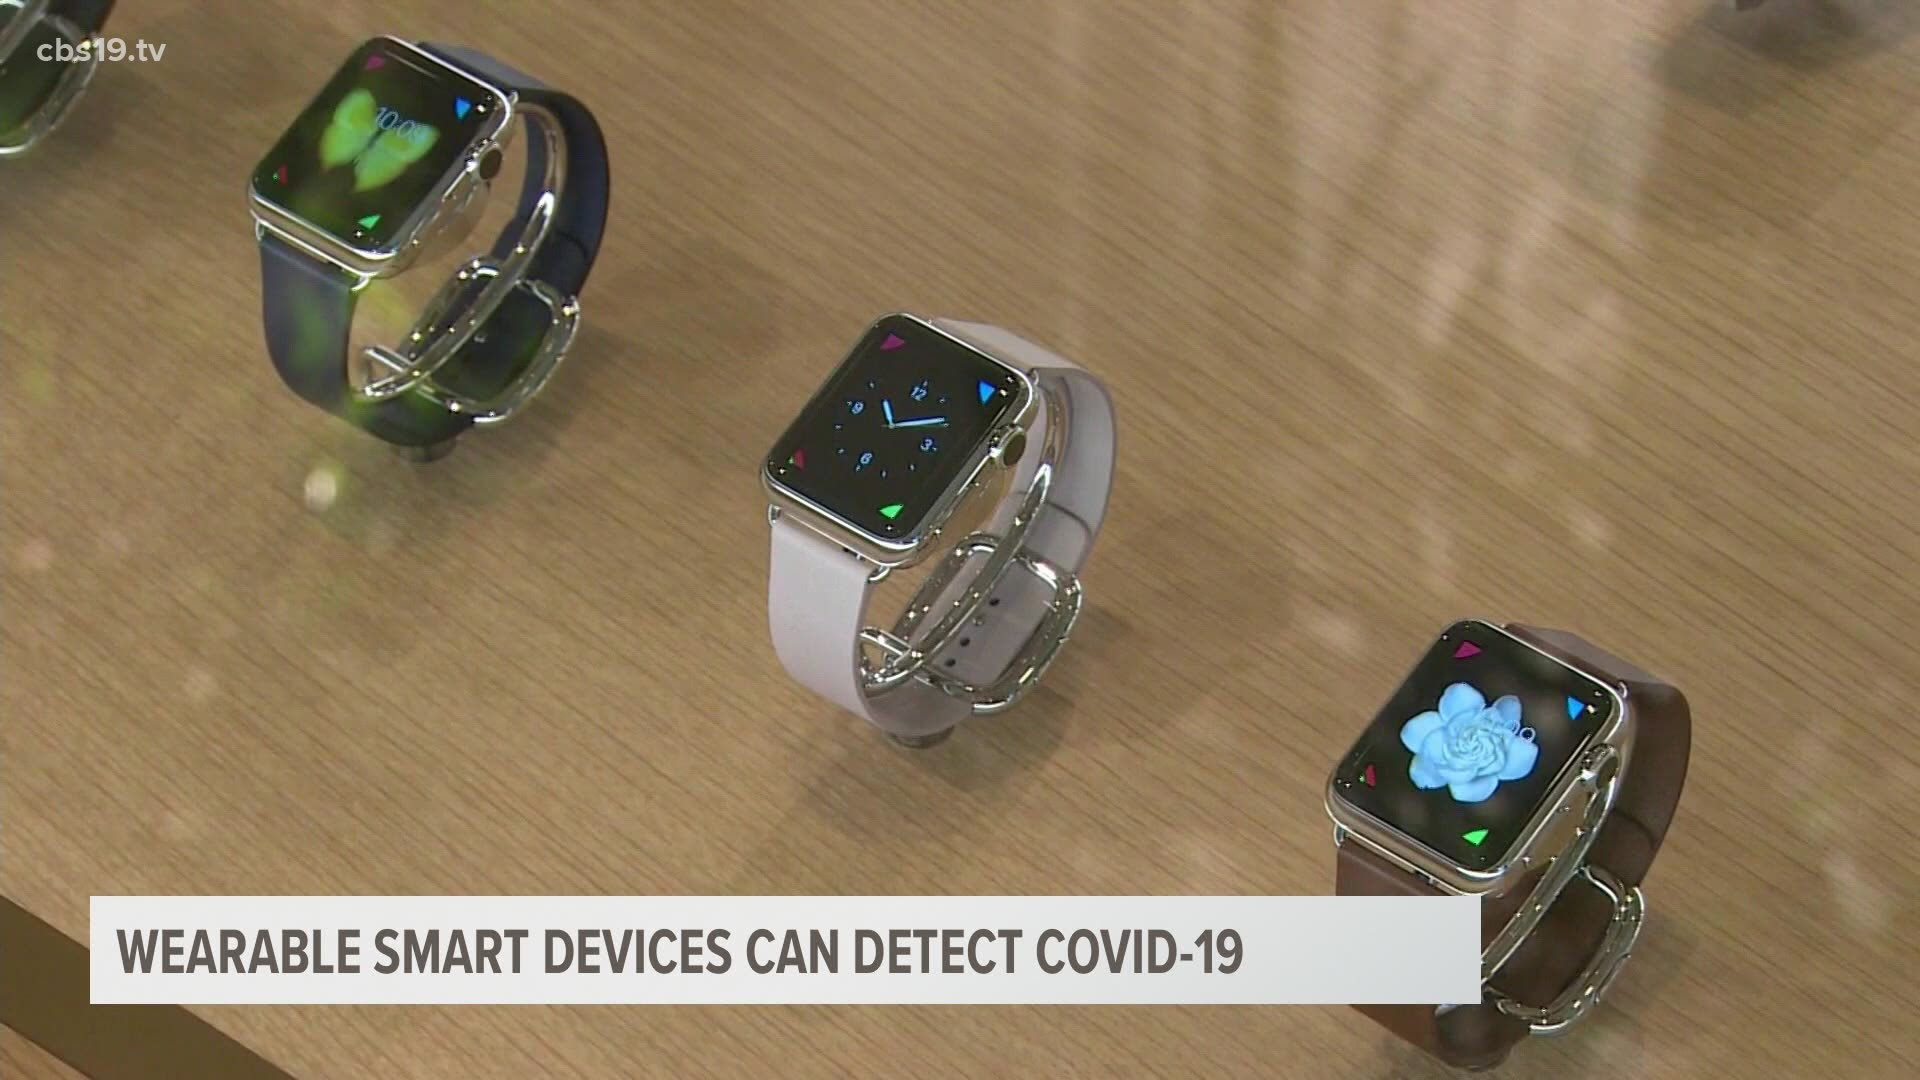 Smartwatches and other similar devices can help detect COVID-19 days before you even show symptoms.